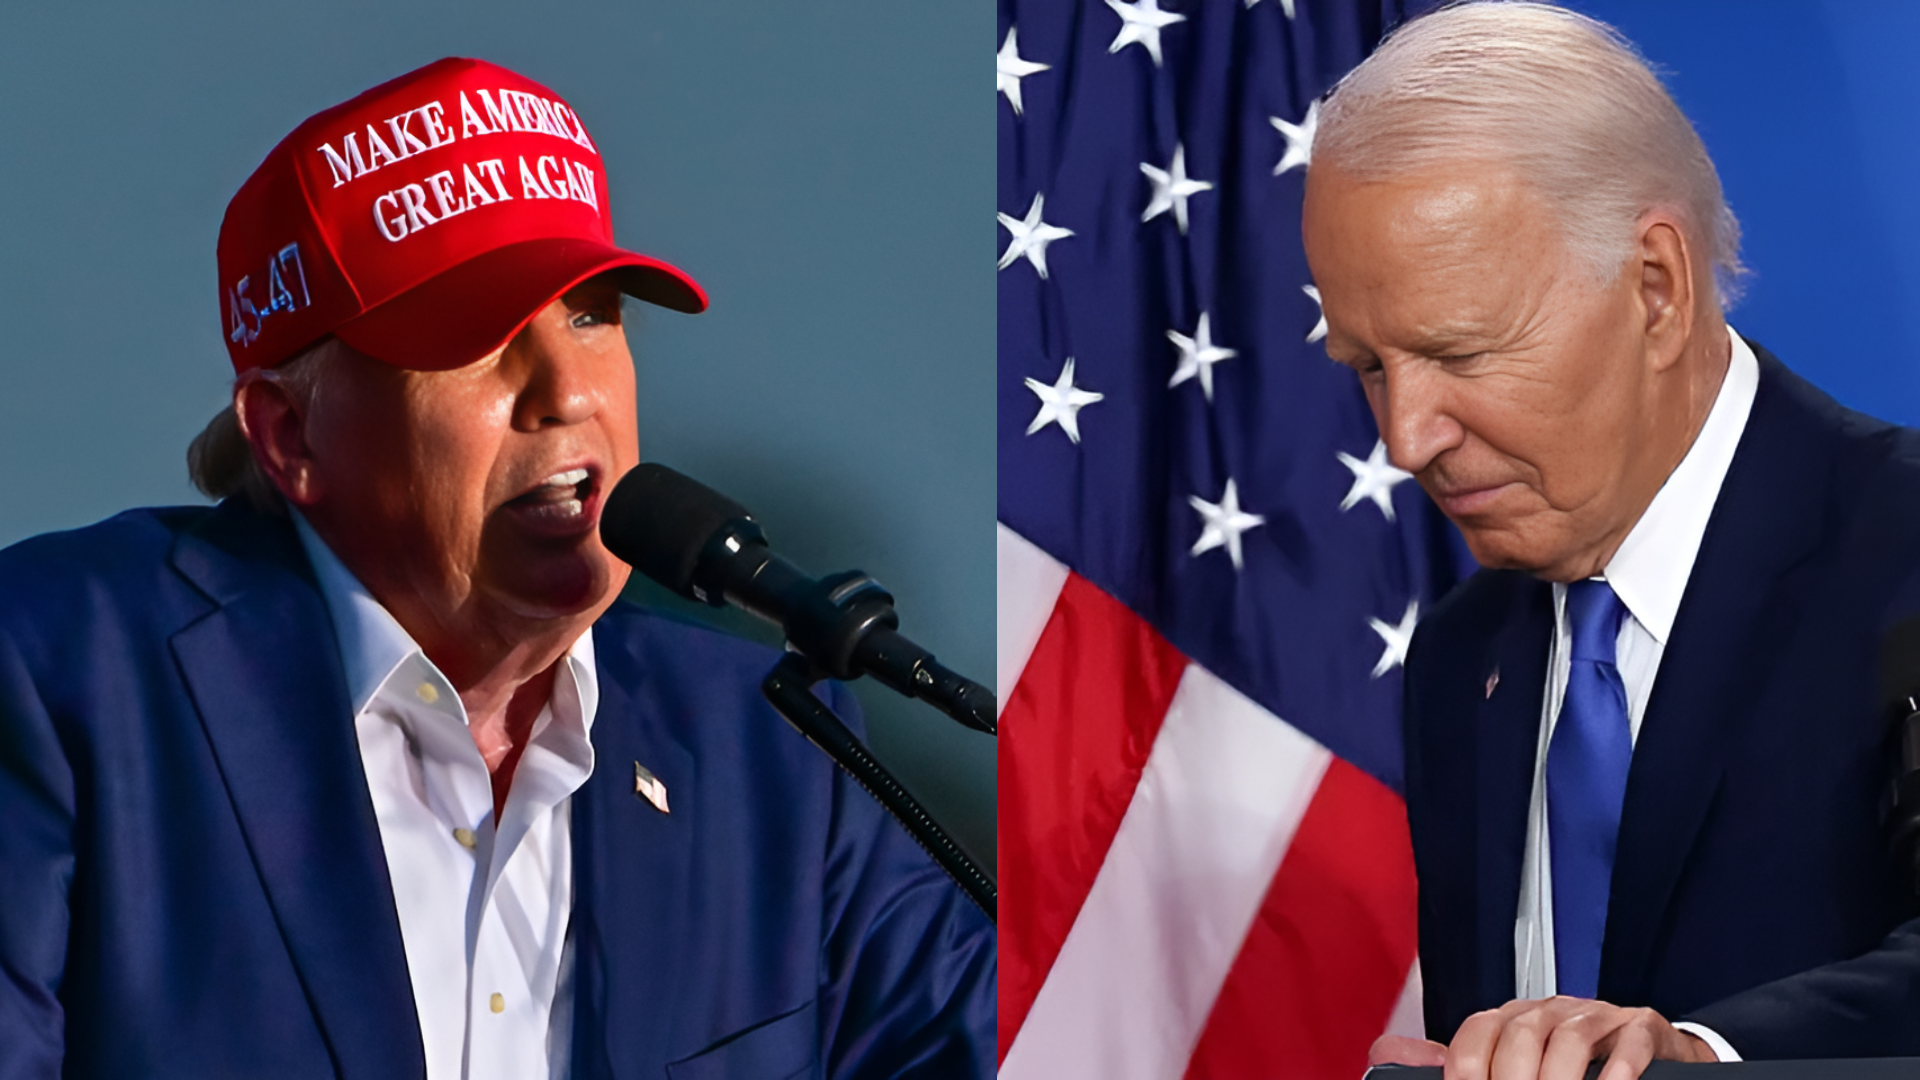 Trump Blasts Biden As ‘Worst President Ever’ After Latter Drops Out Of Race